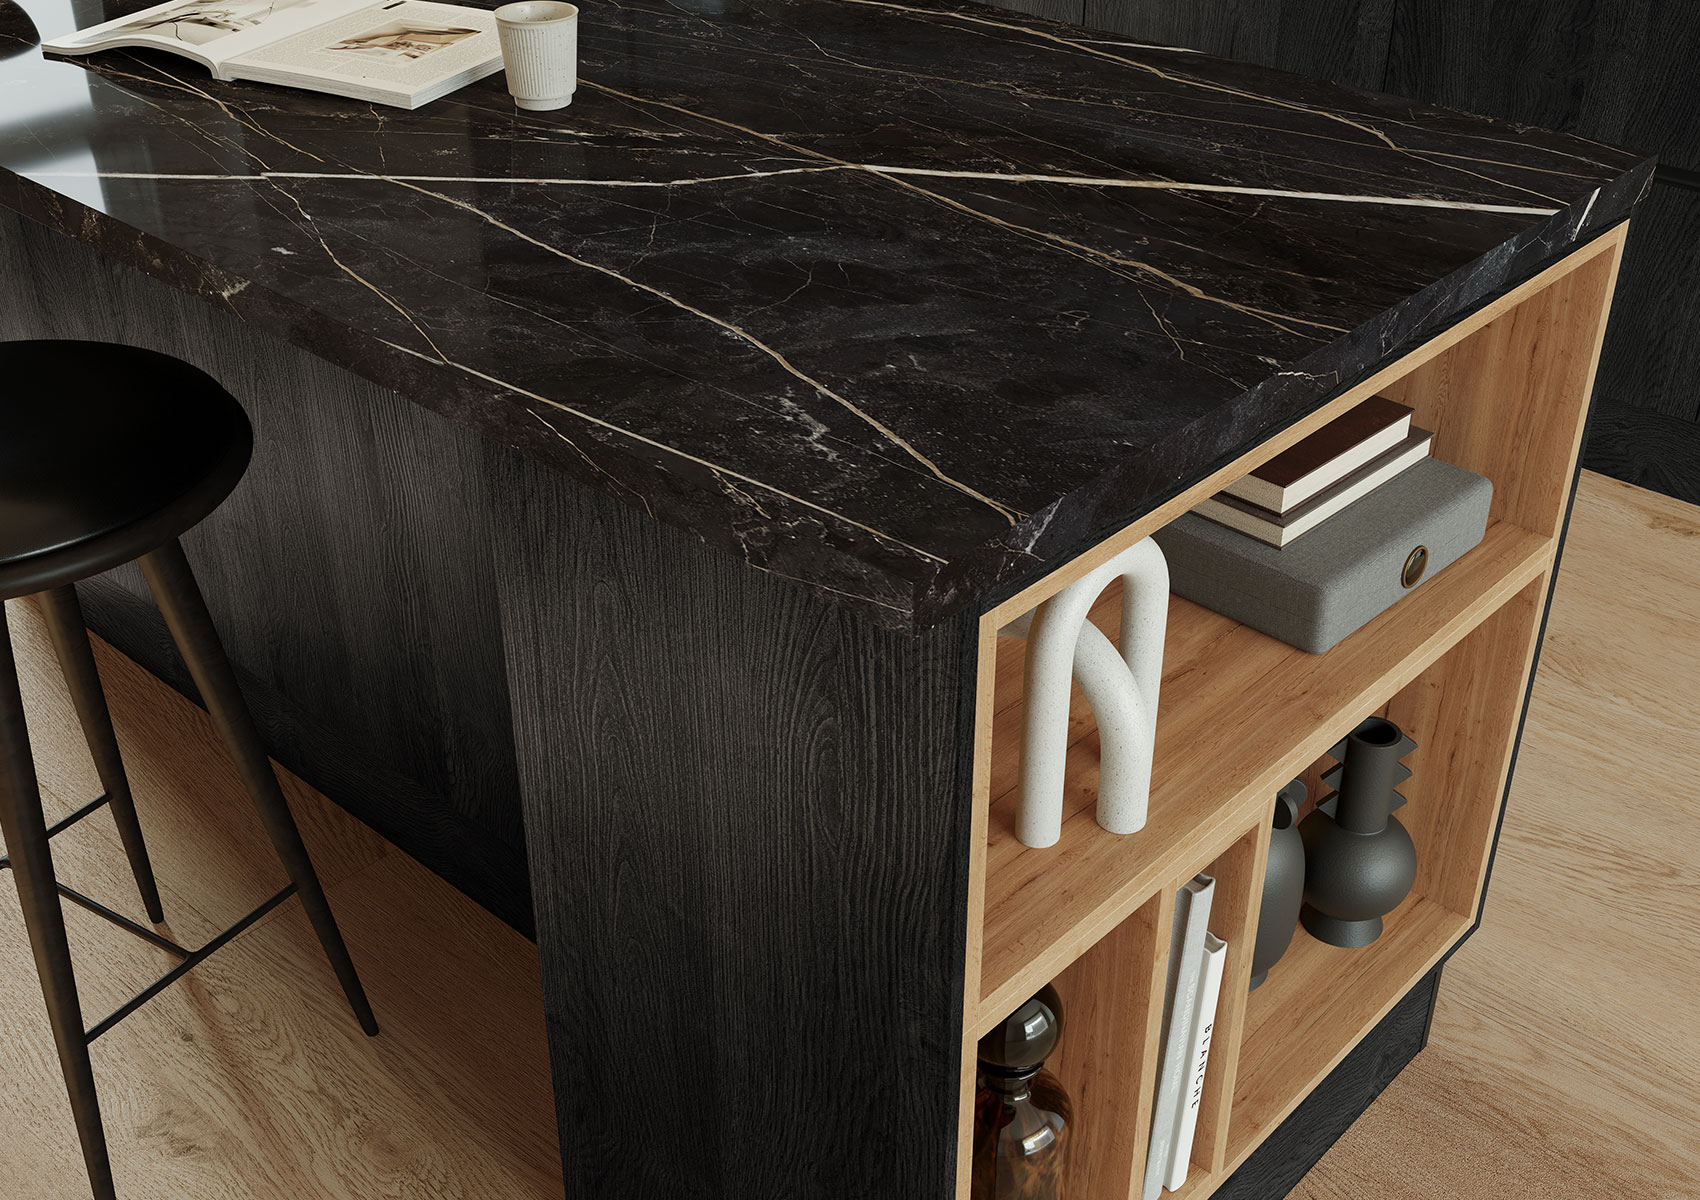 Close-up of the kitchen island from diagonally above with marbled worktop with bar stool and integrated shelving unit